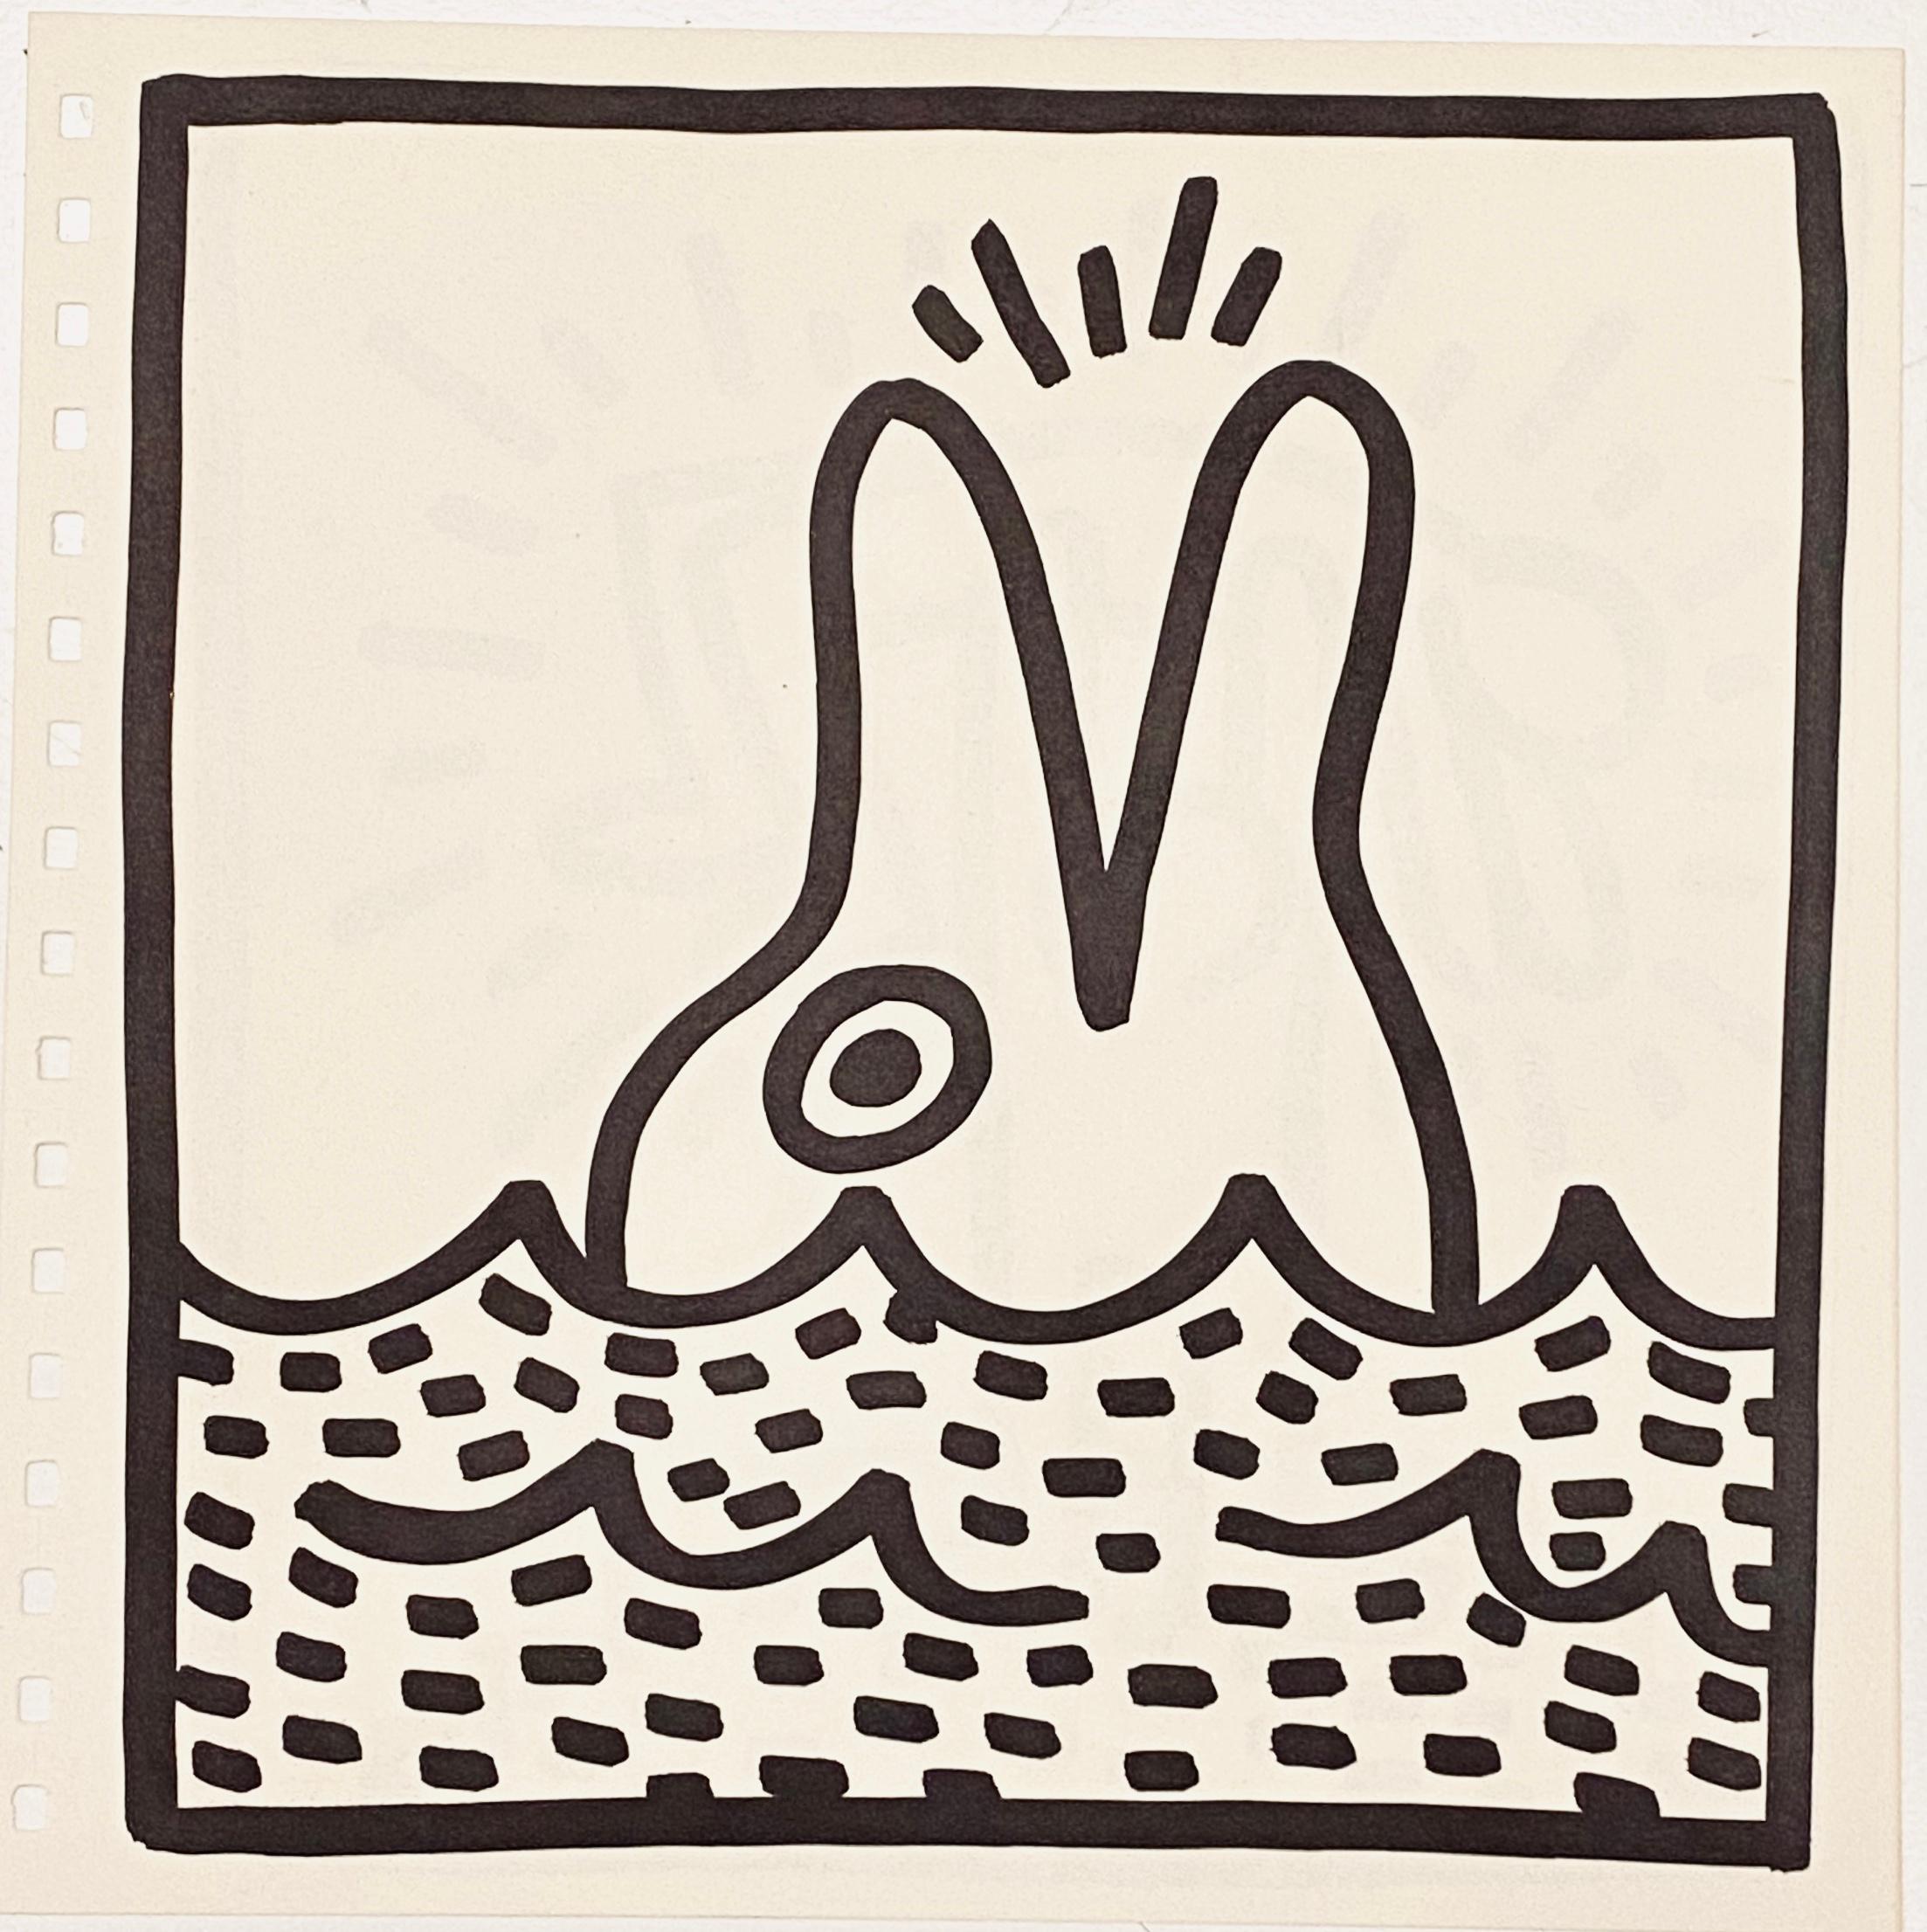 Keith Haring (untitled) figurative lithograph 1982:
Double-sided lithographic insert from the seminal spiral bound, 1982 Keith Haring exhibition catalog published by Tony Shafrazi Gallery New York.

Offset lithograph; 9 x 9 inches.
Condition: minor